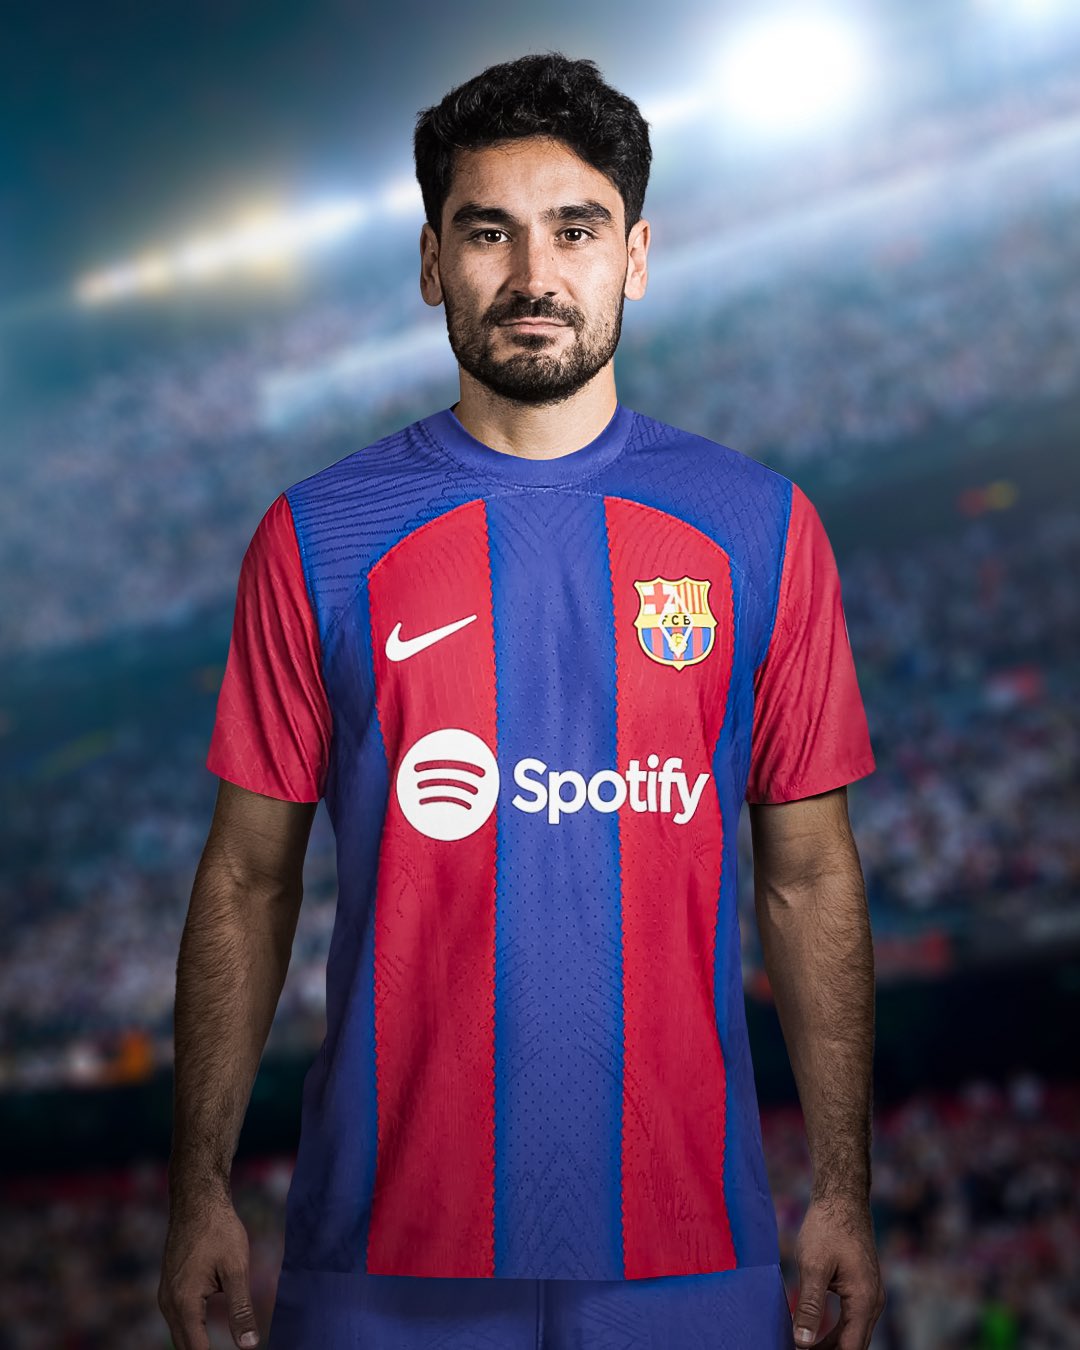 Fabrizio Romano on Twitter: "Ilkay Gündogan to Barcelona, here we go! Final approval arrived on club side to register him as new signing, green light from the player. It's done deal, signed